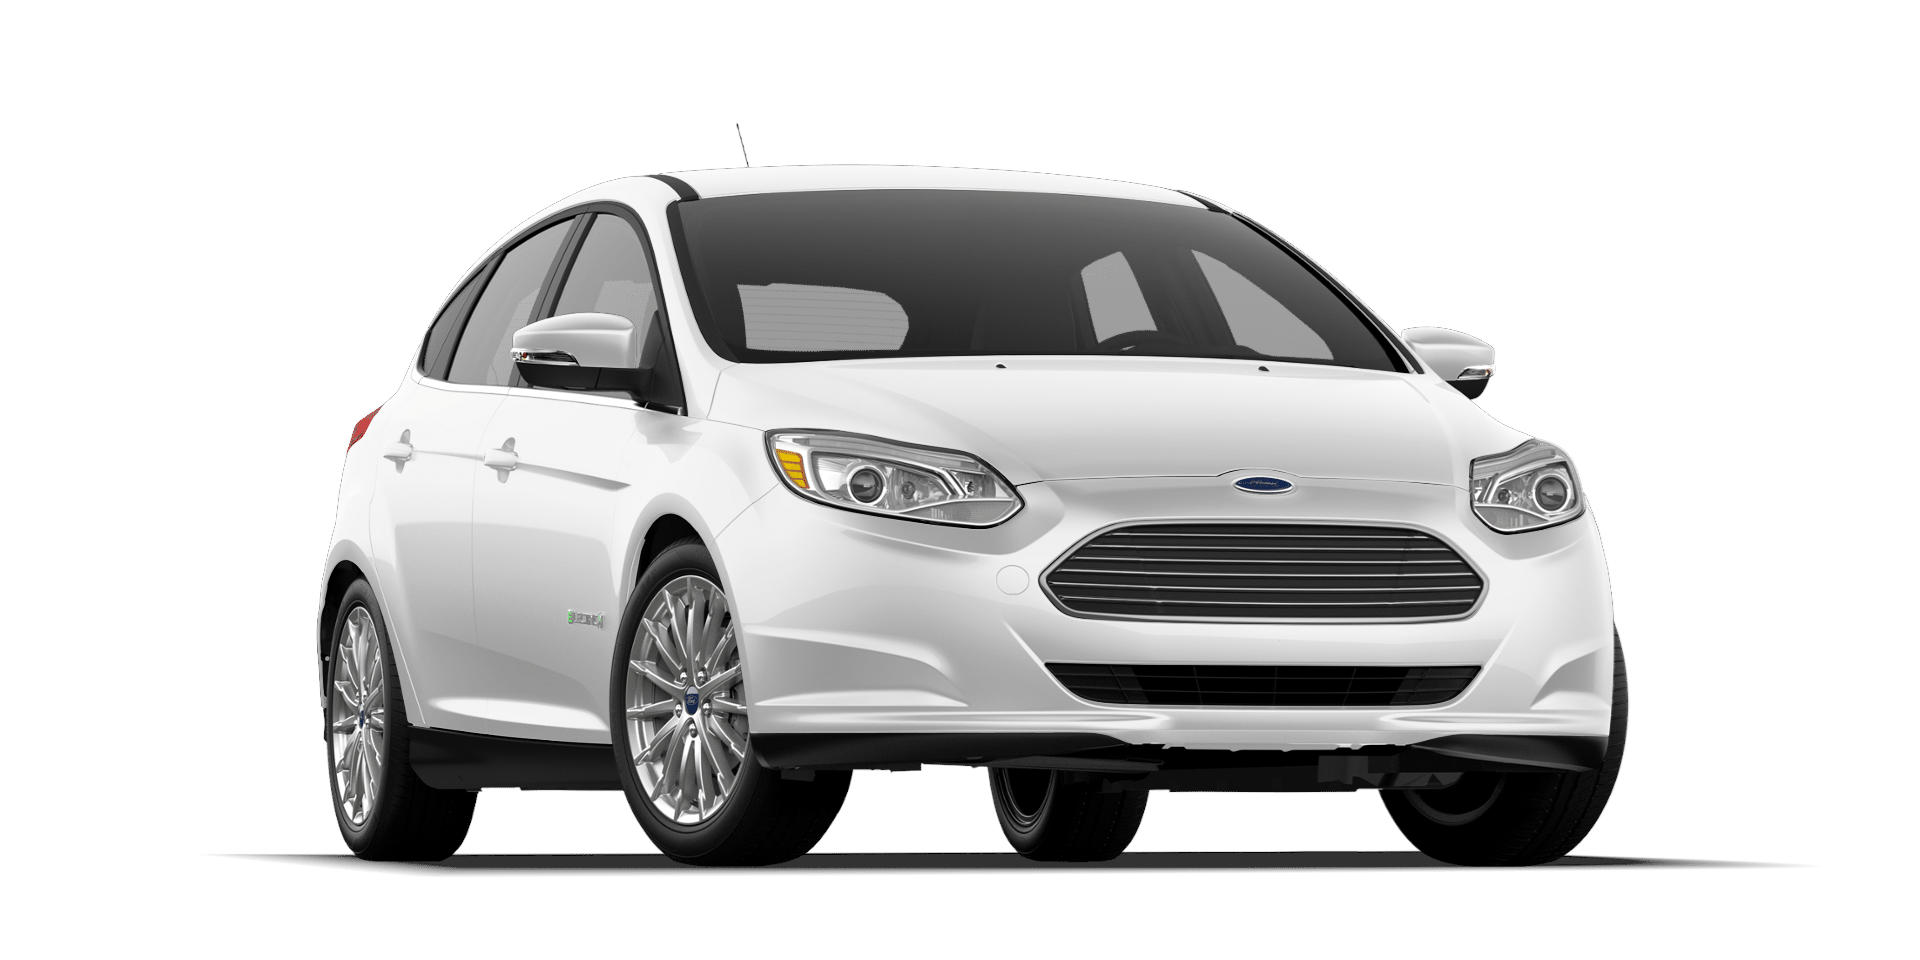 2015 Ford Focus Electric Hatchback Full Specs, Features and Price | CarBuzz